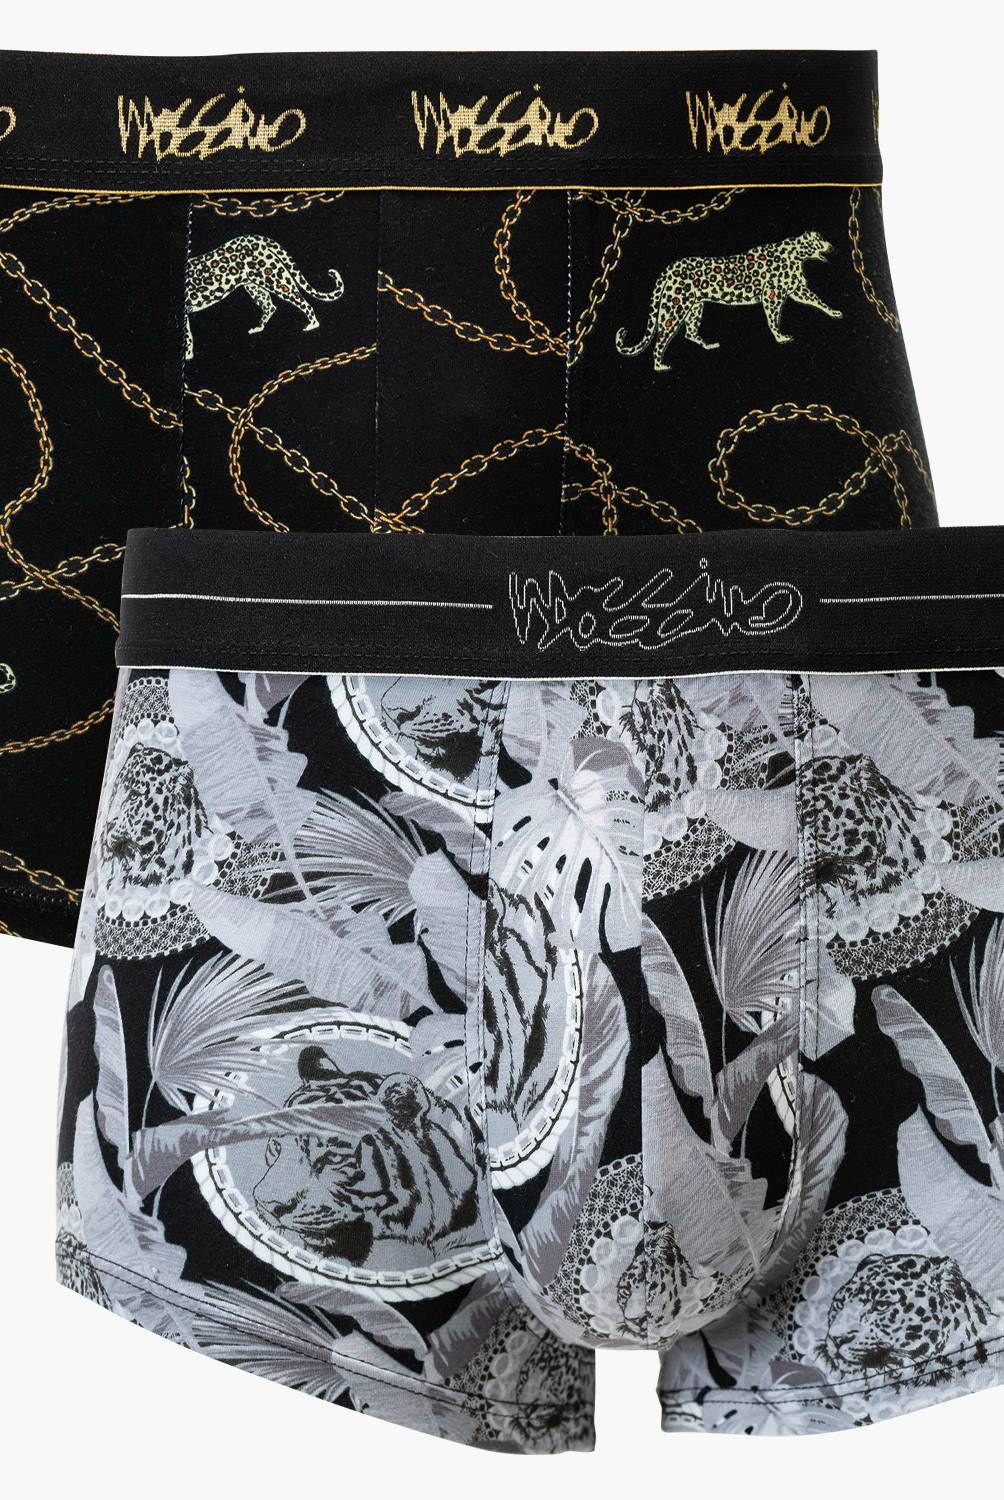 MOSSIMO - Pack x2 Boxers Hombre